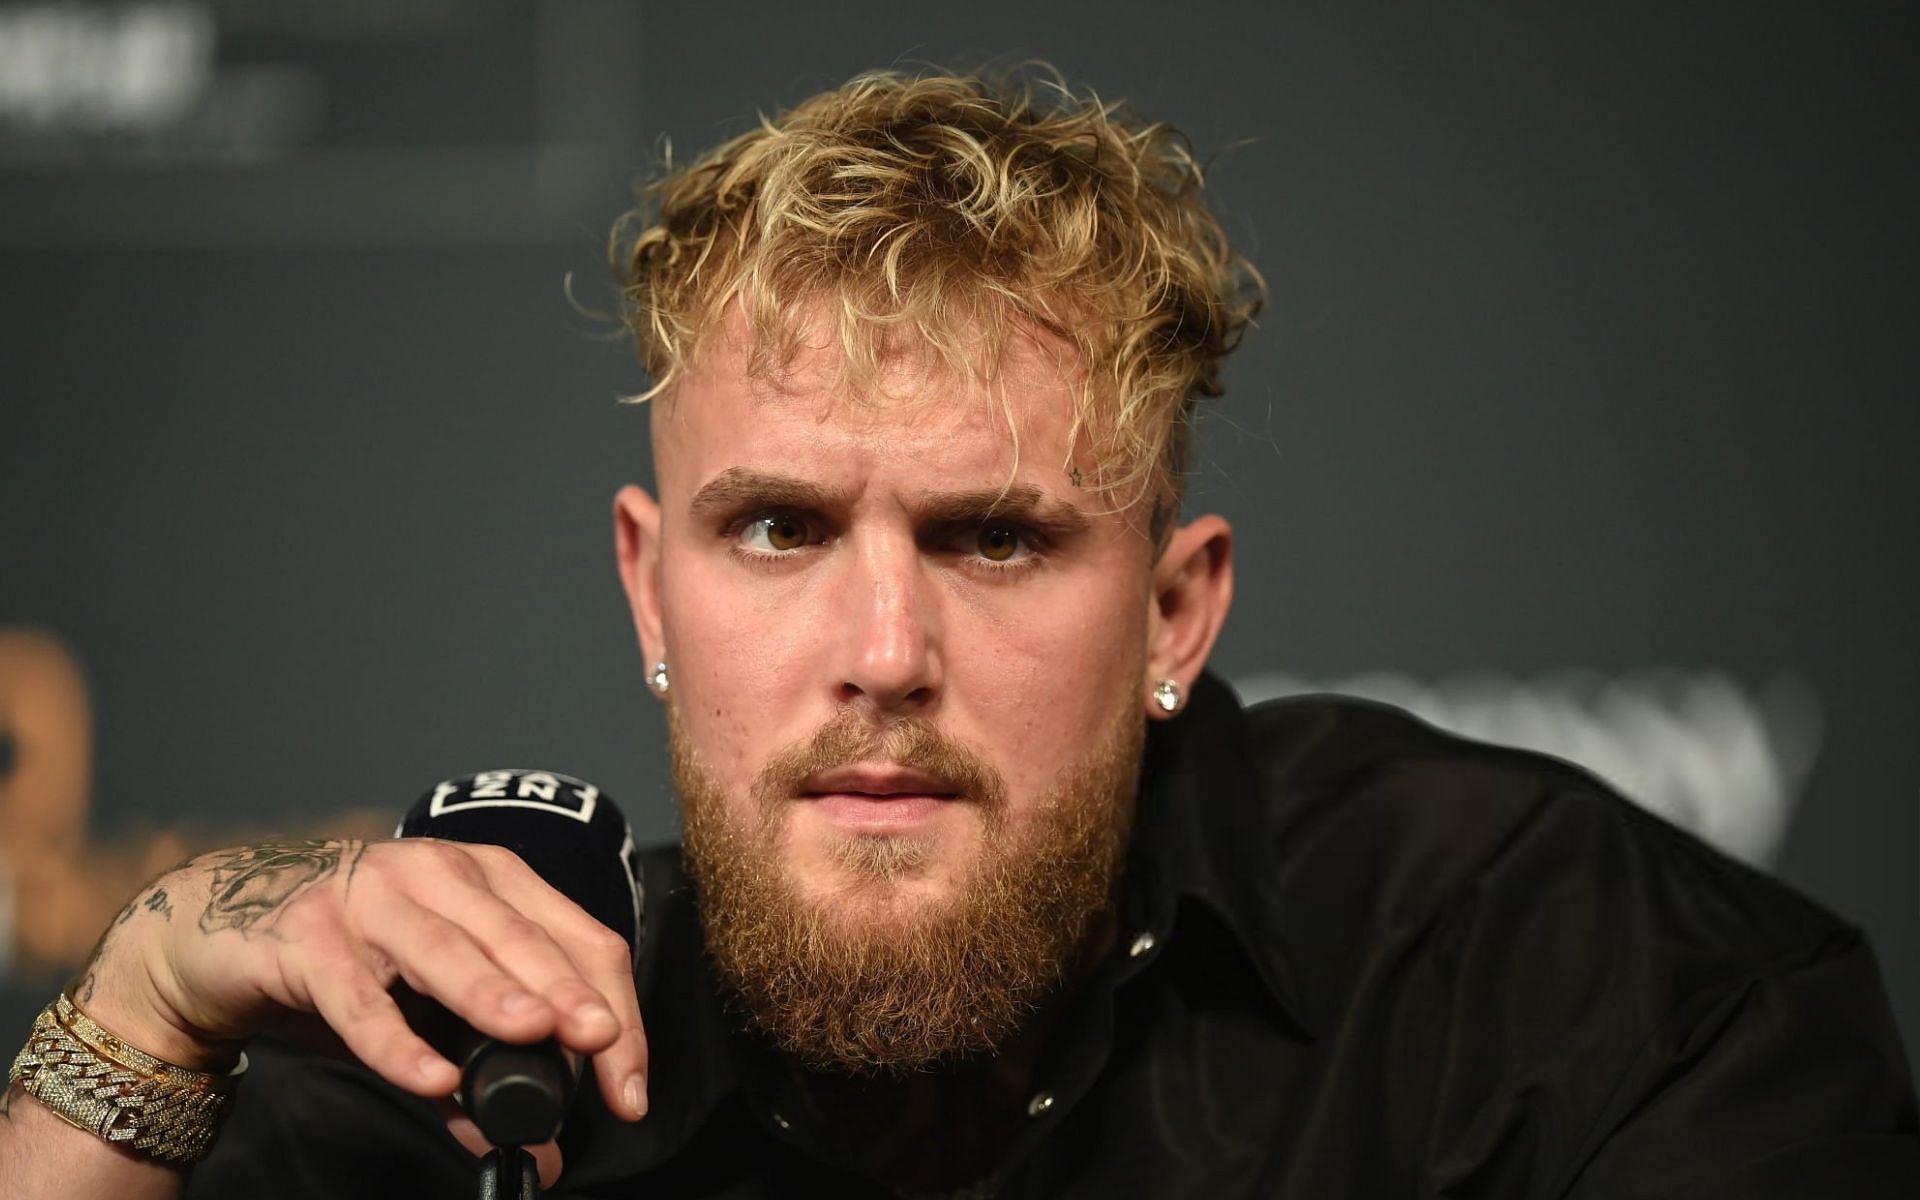 UFC Hall of Famer reveals insulting DMs sent by Jake Paul